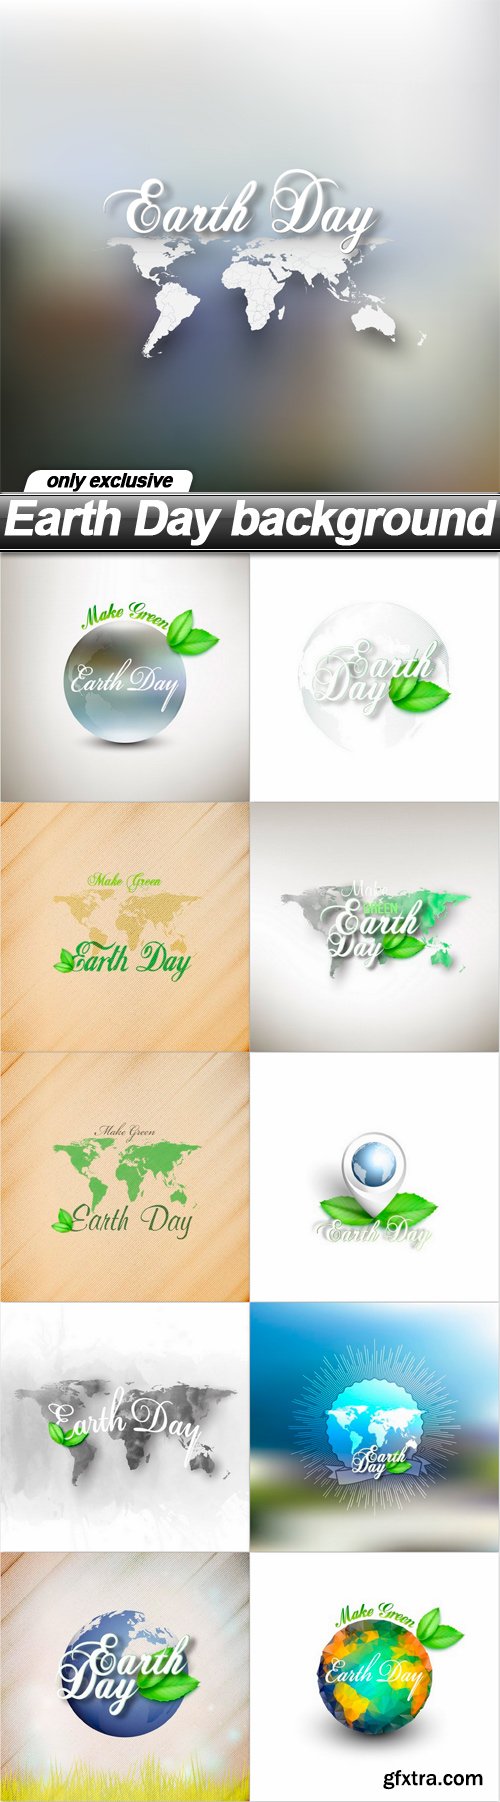 Earth Day background - 11 EPS